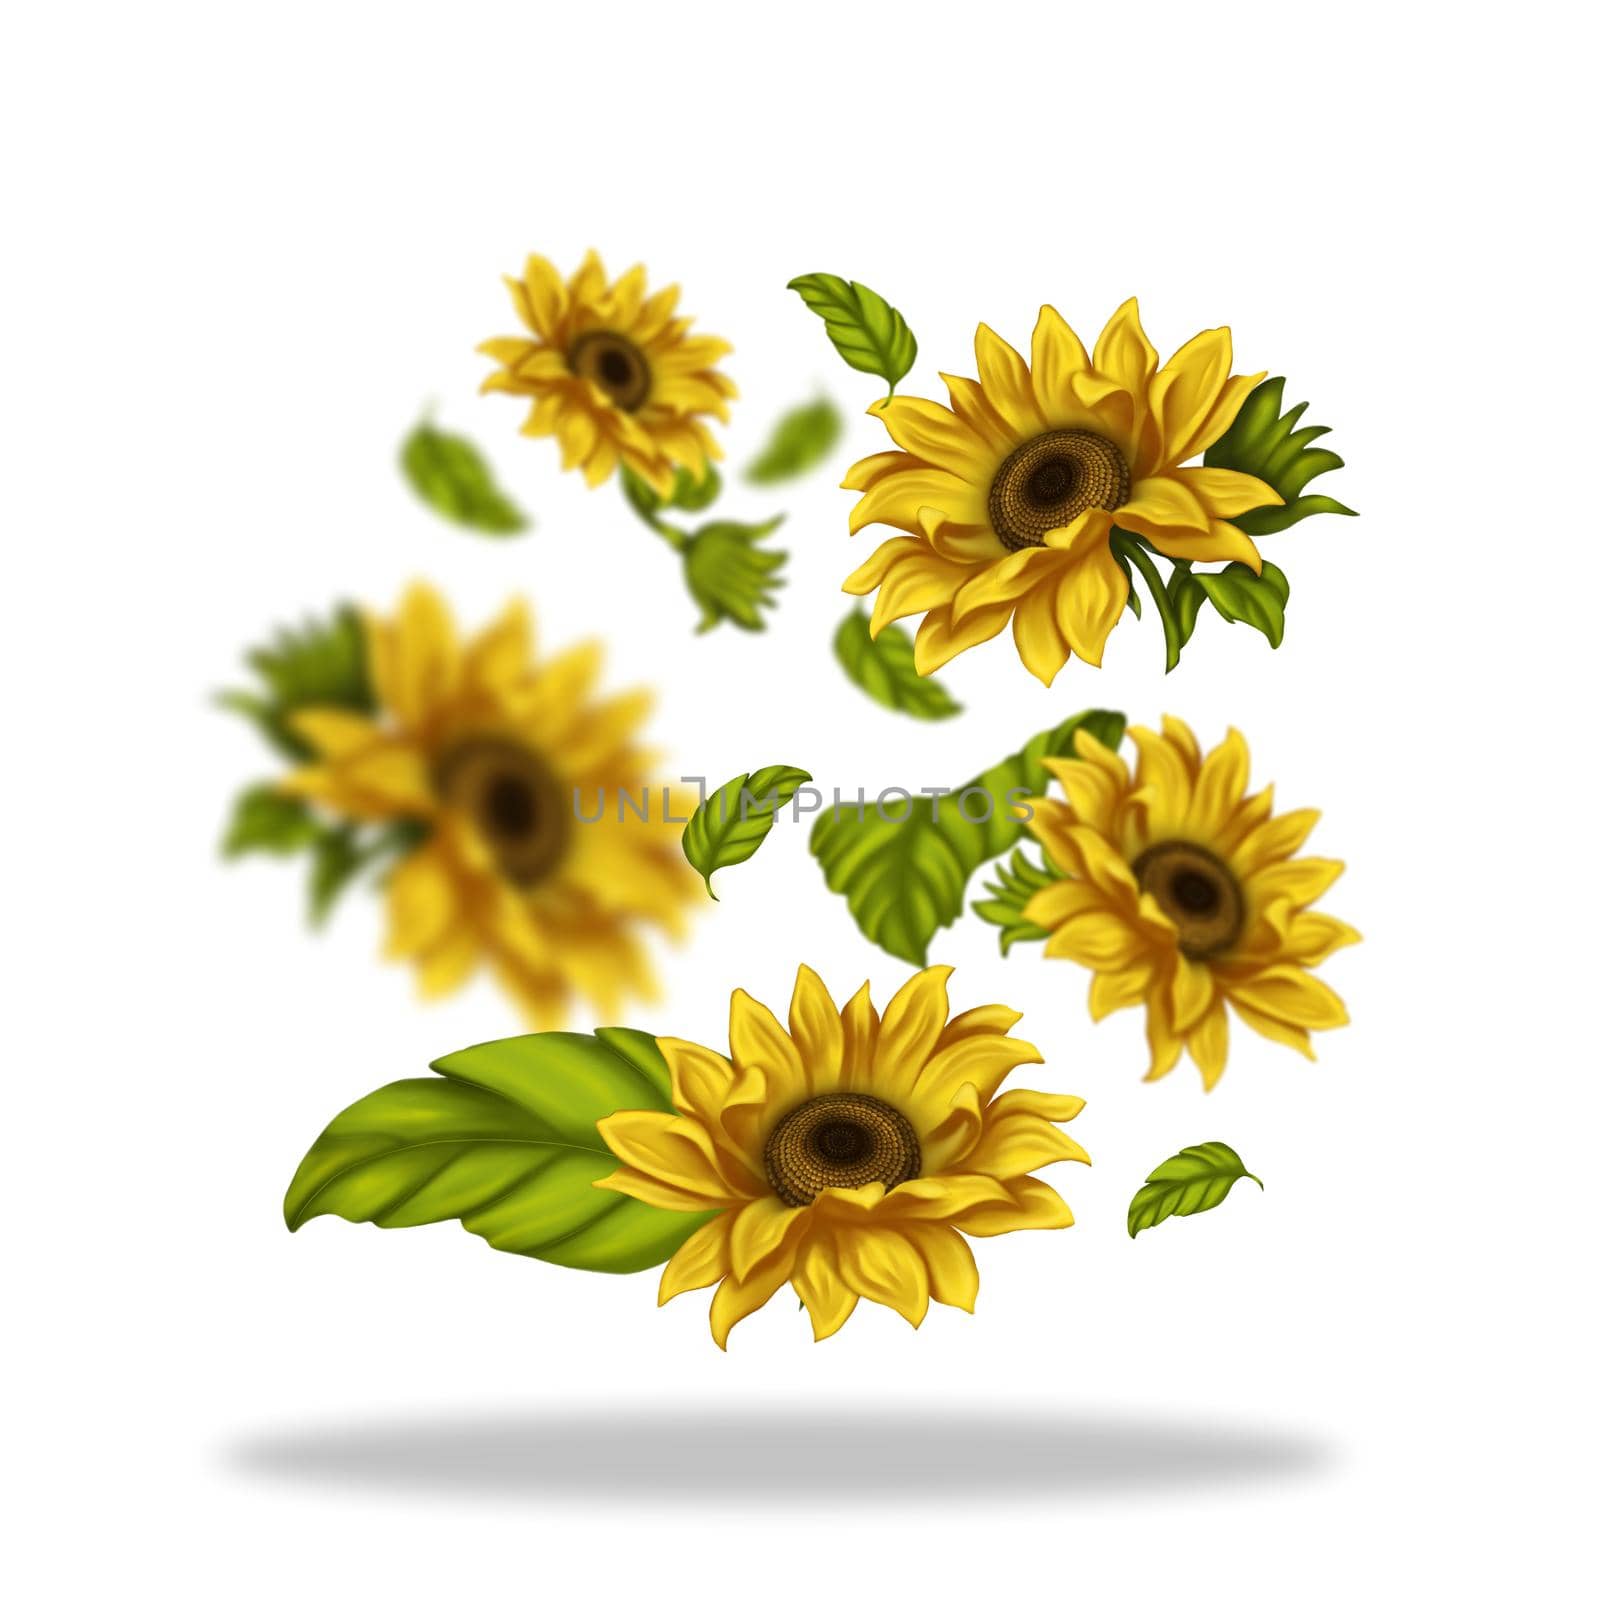 Illustration of sunflower flowers. Flowers freely levitate in space. Bright flowers on a light background. Summer, sunflowers.